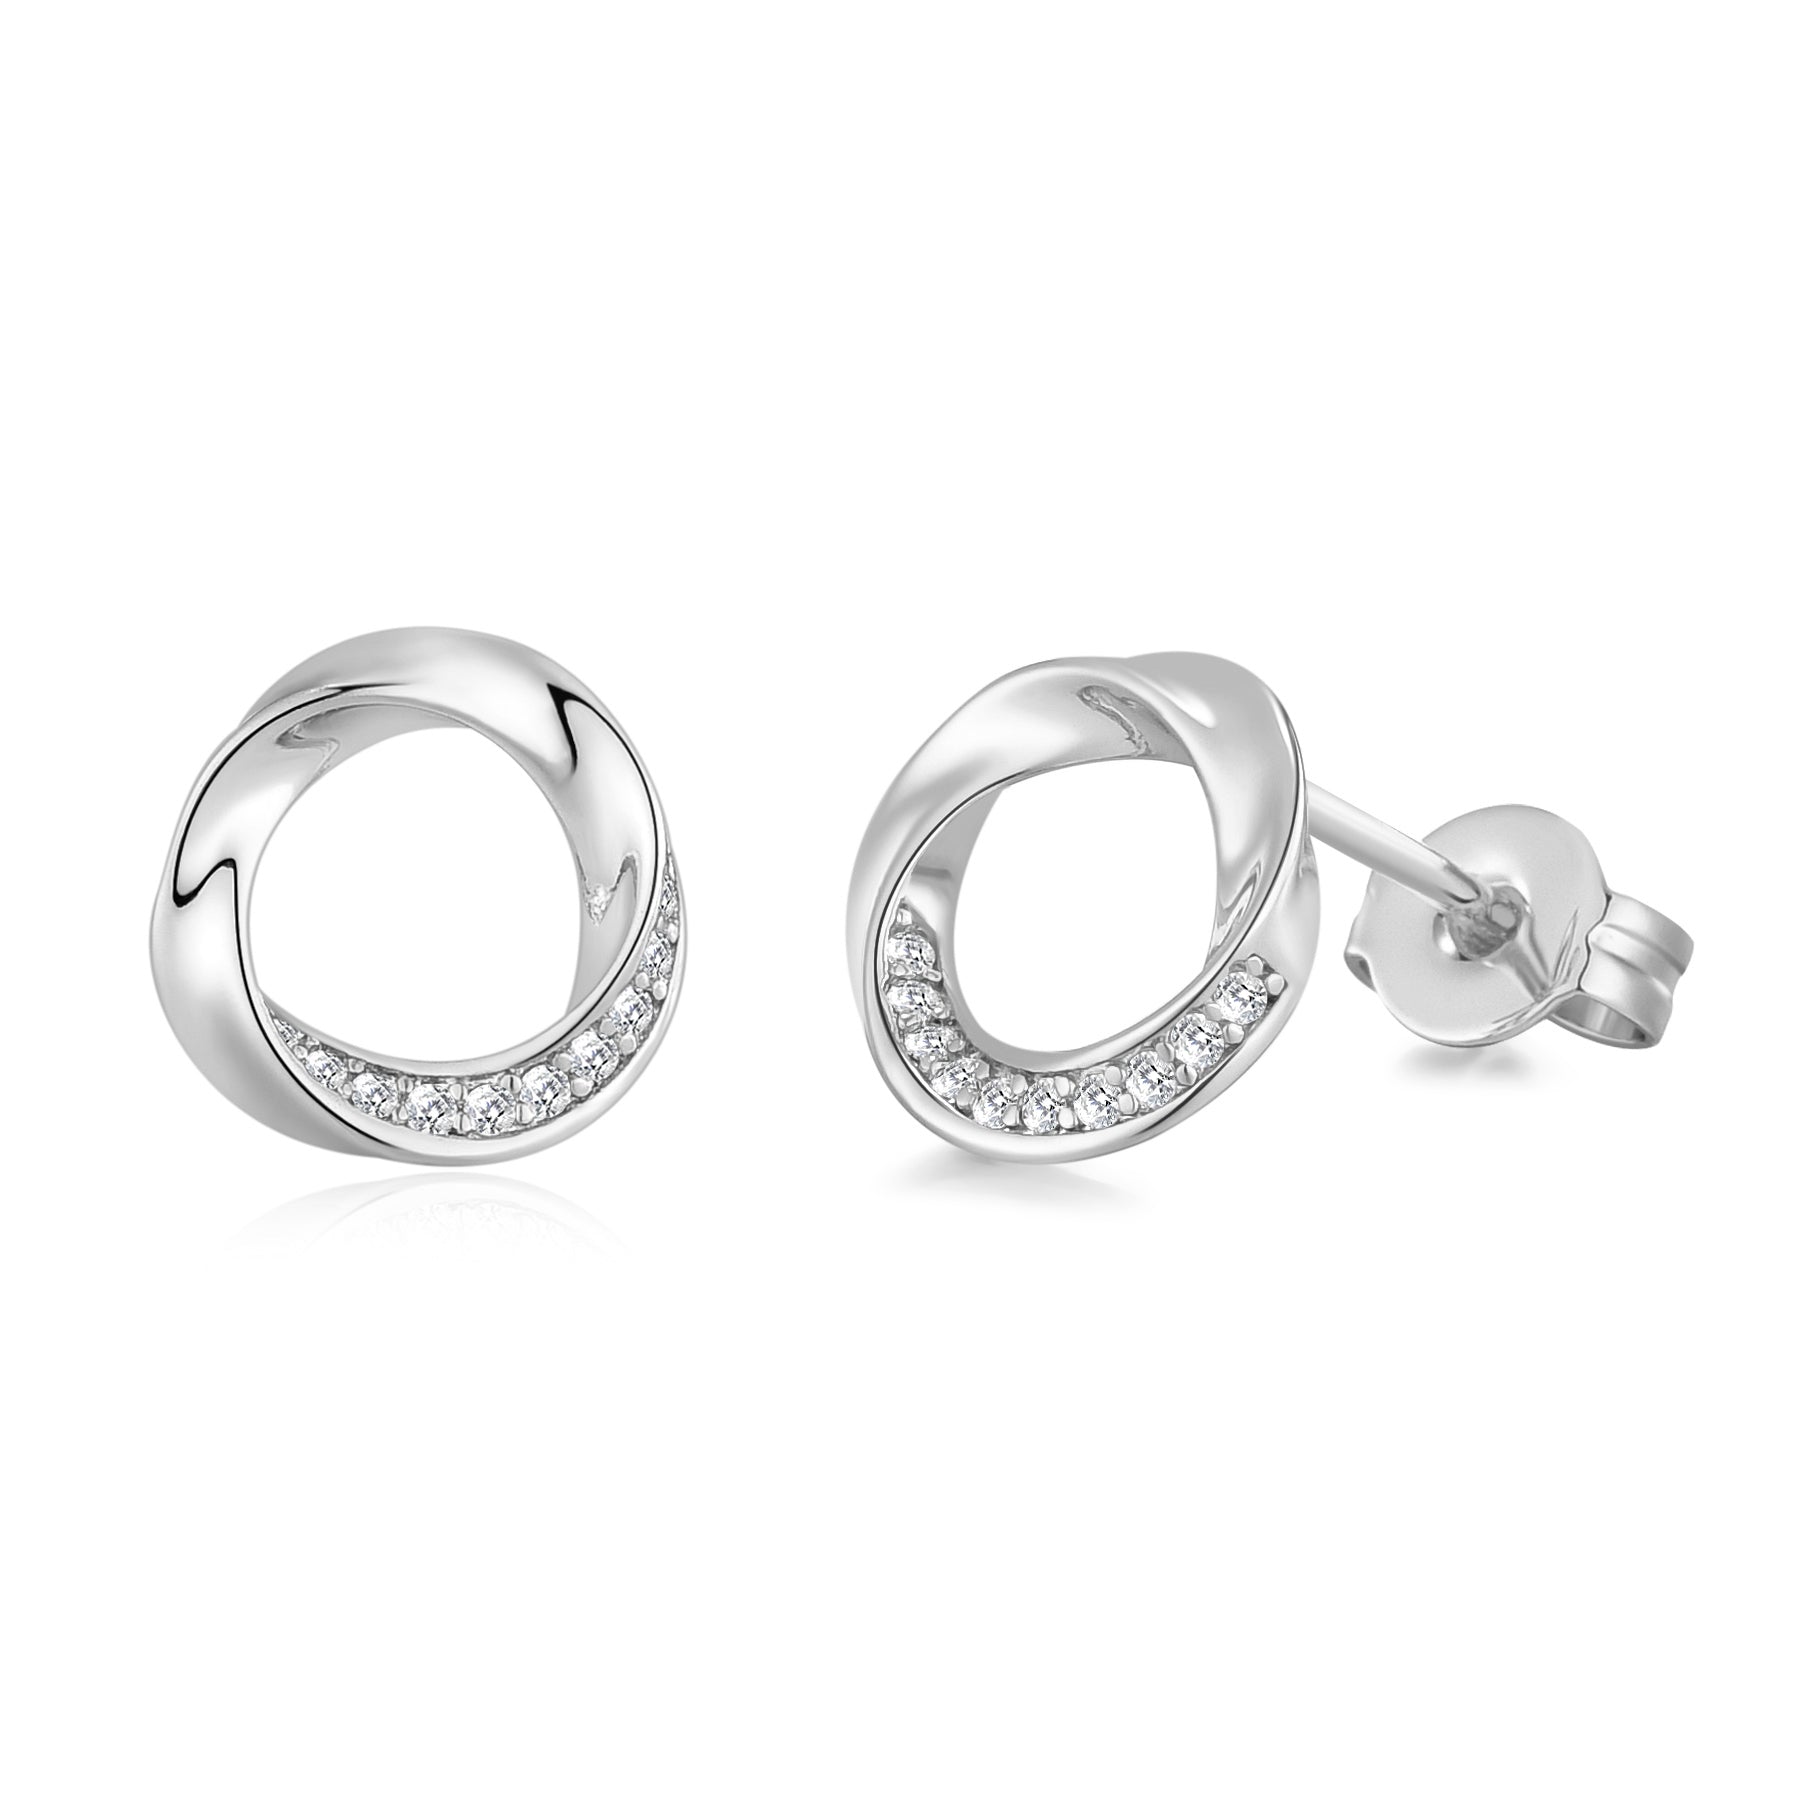 Silver Plated Circle Twist Earrings Created with Zircondia® Crystals by Philip Jones Jewellery